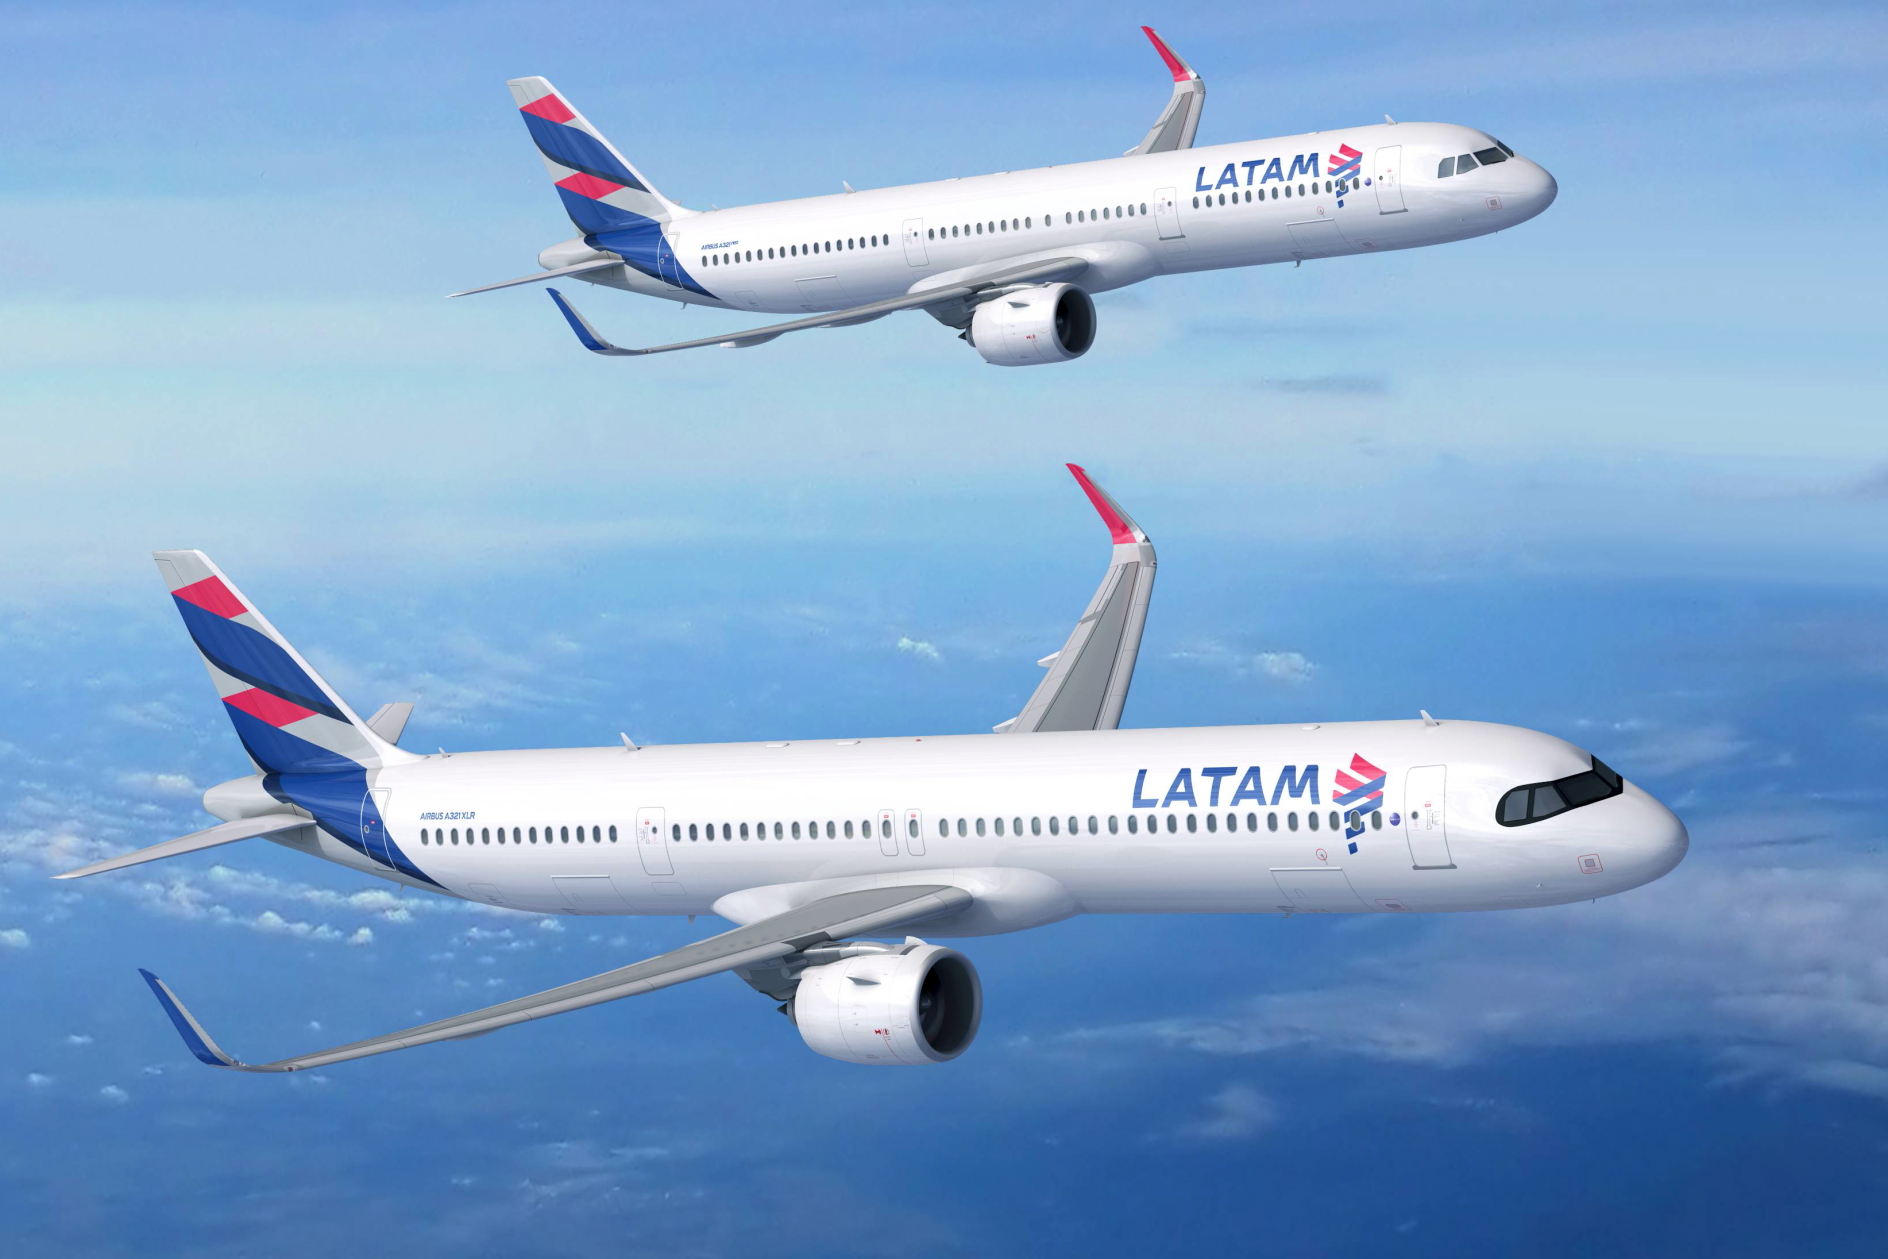 LATAM Cargo inaugurates new route from Europe to strengthen